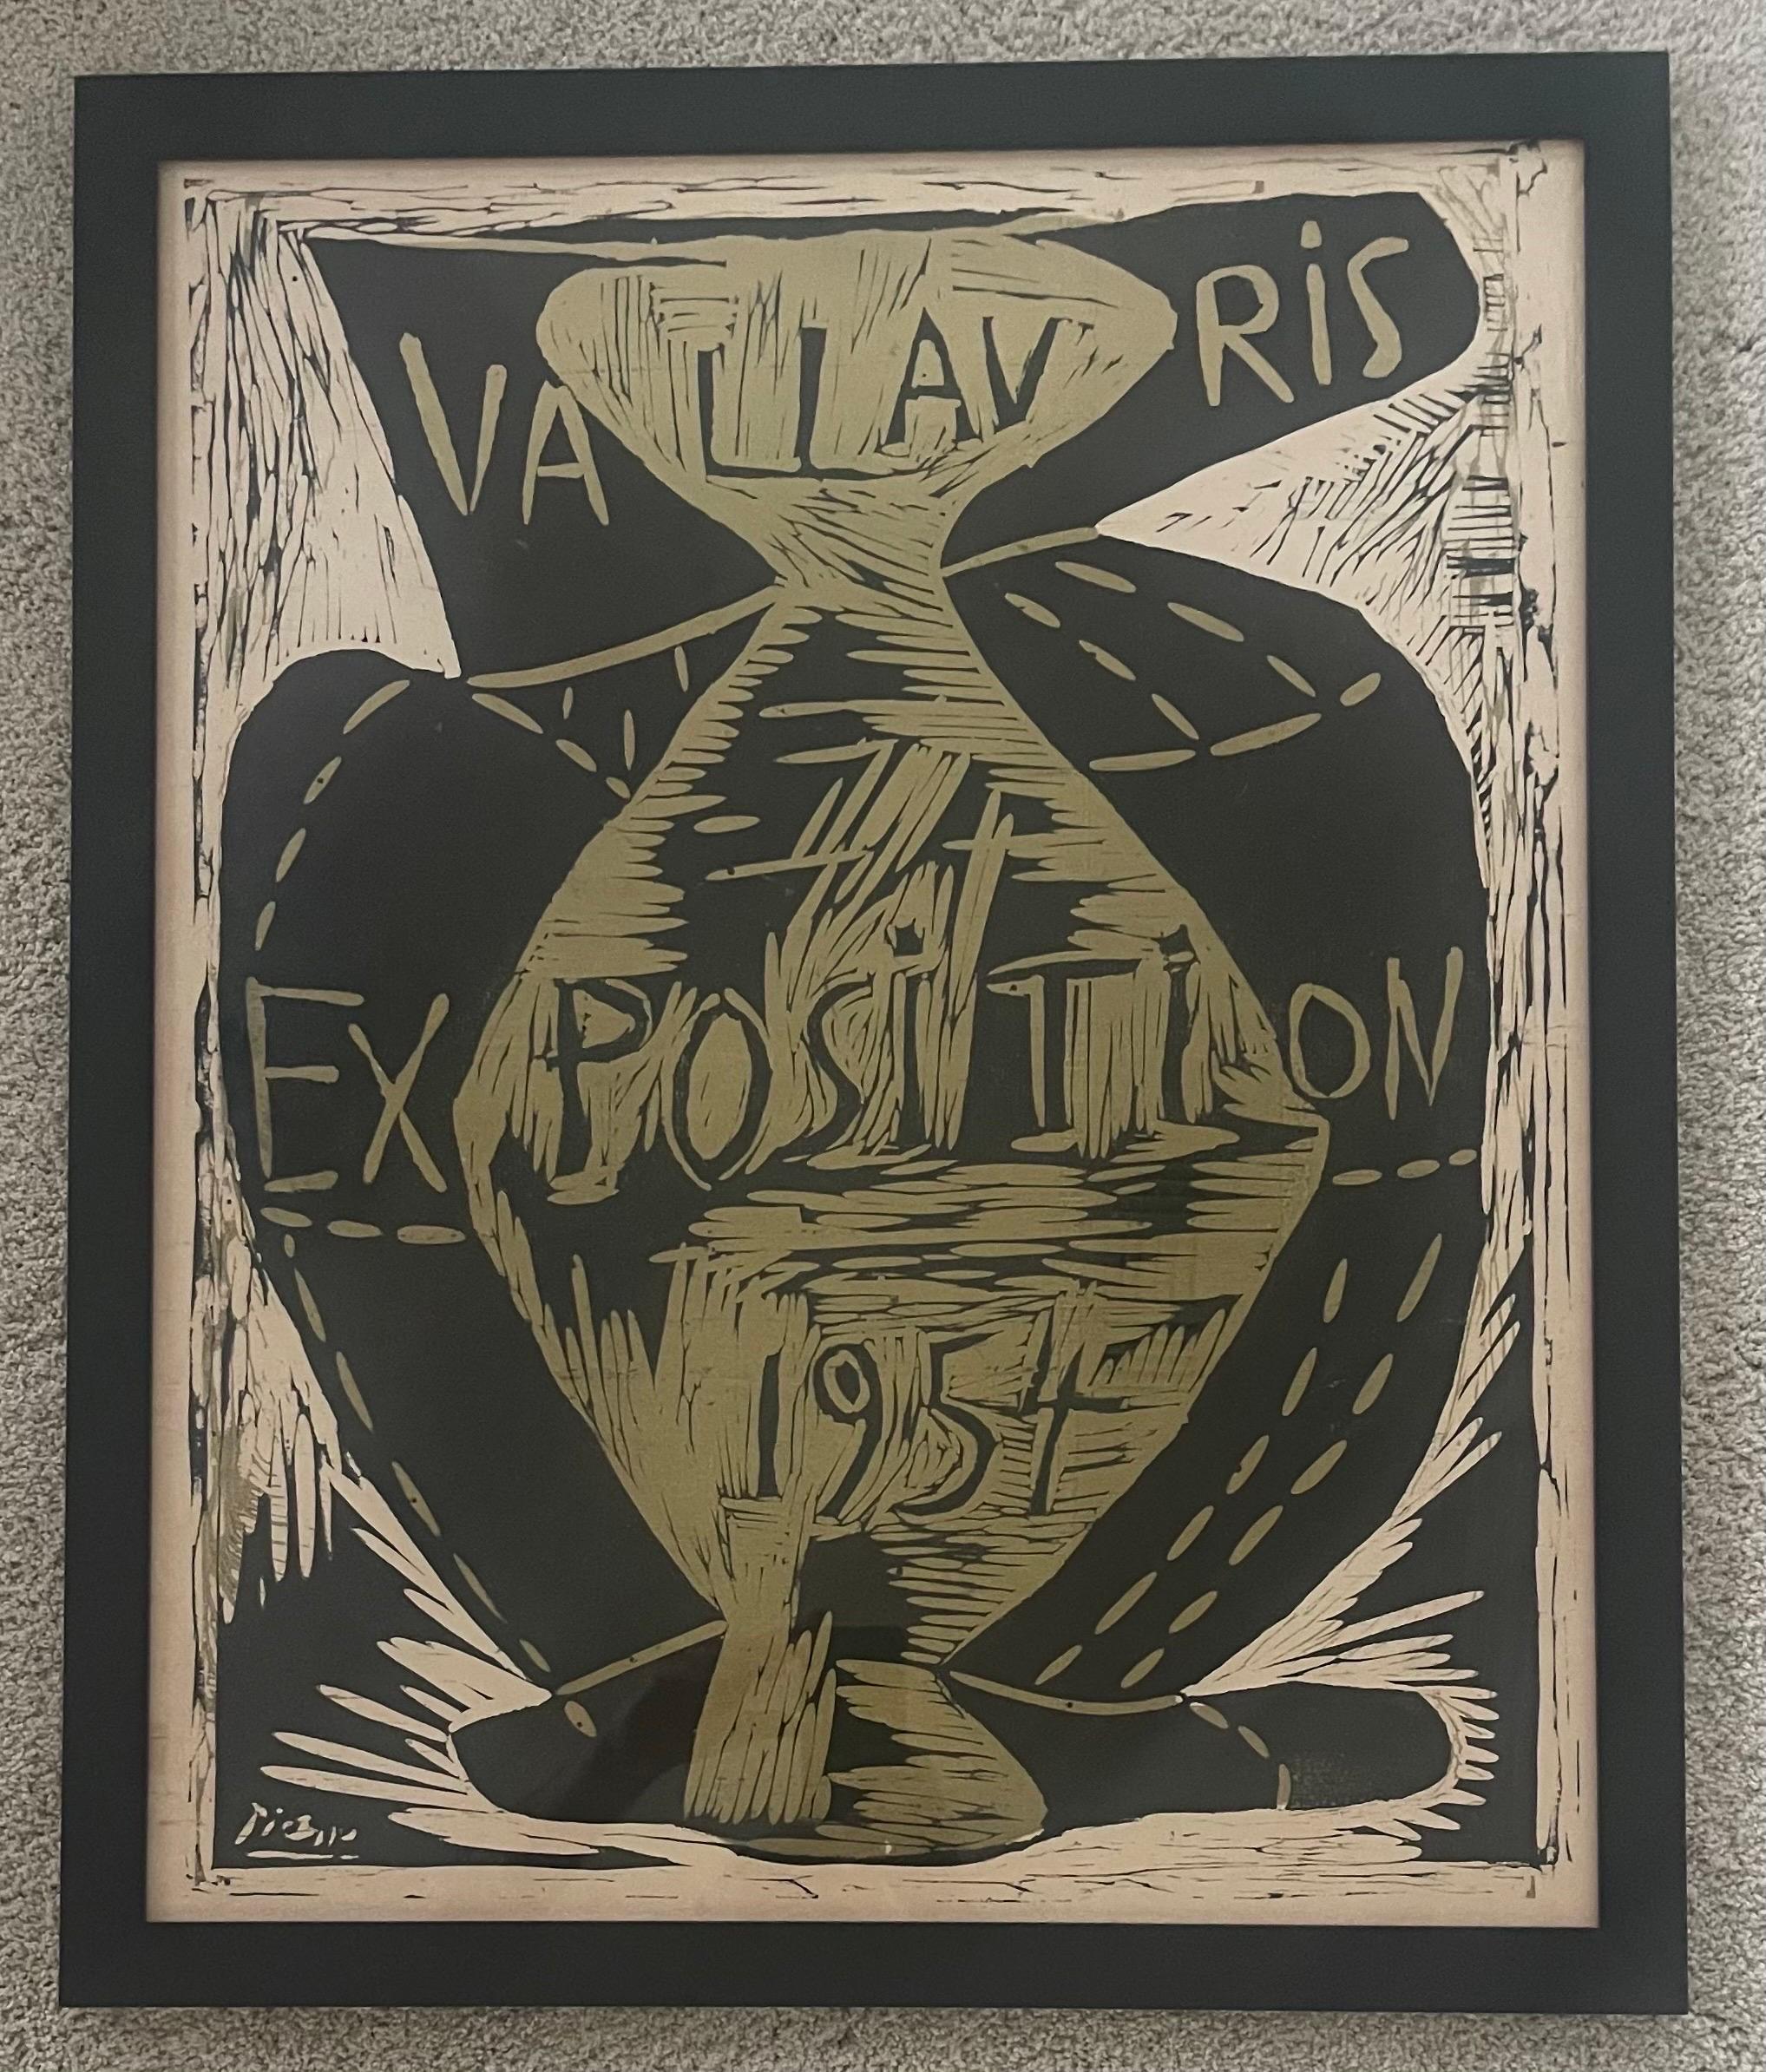 Highly collectible and rare linocut poster 